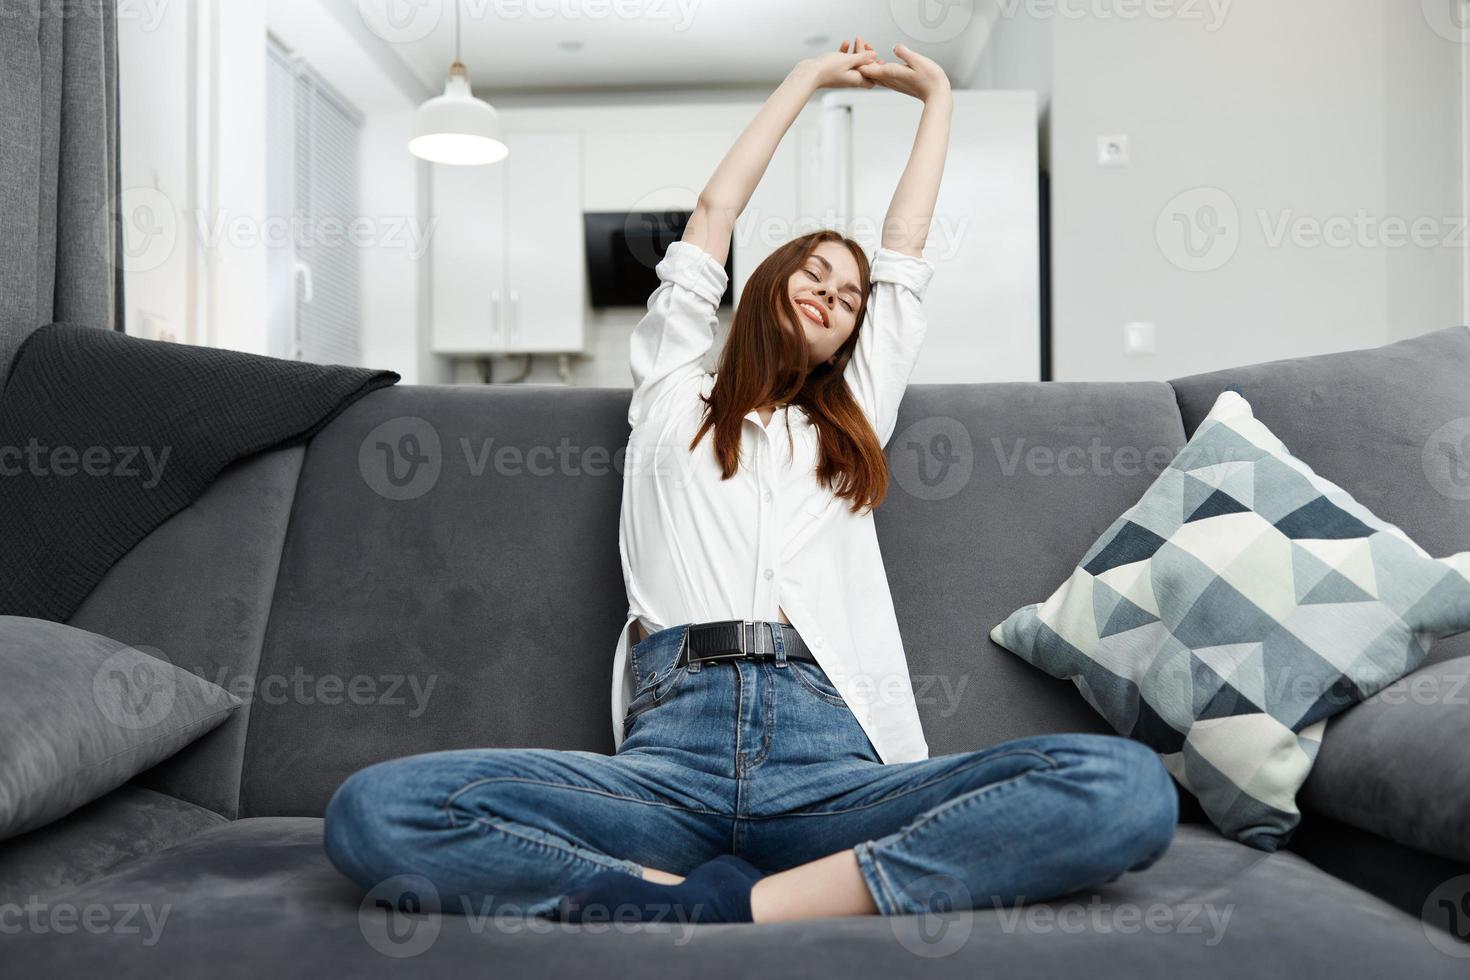 woman pulls herself up holding her hands above her head On the couch at home rest photo